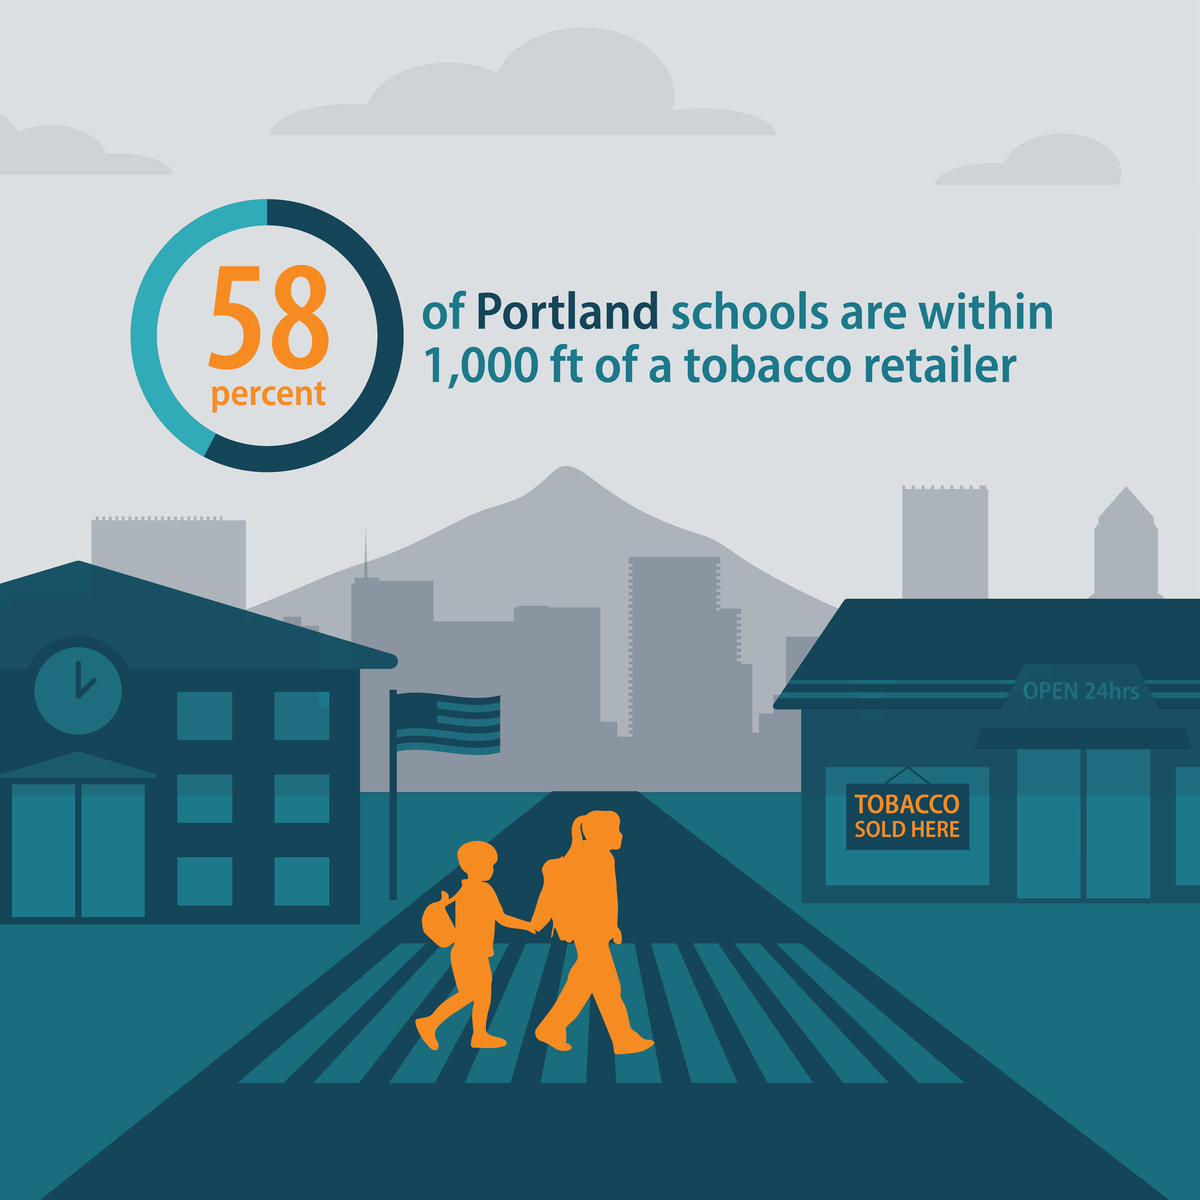 58 percent of Portland schools are within 1,000 feet of a tobacco retailer